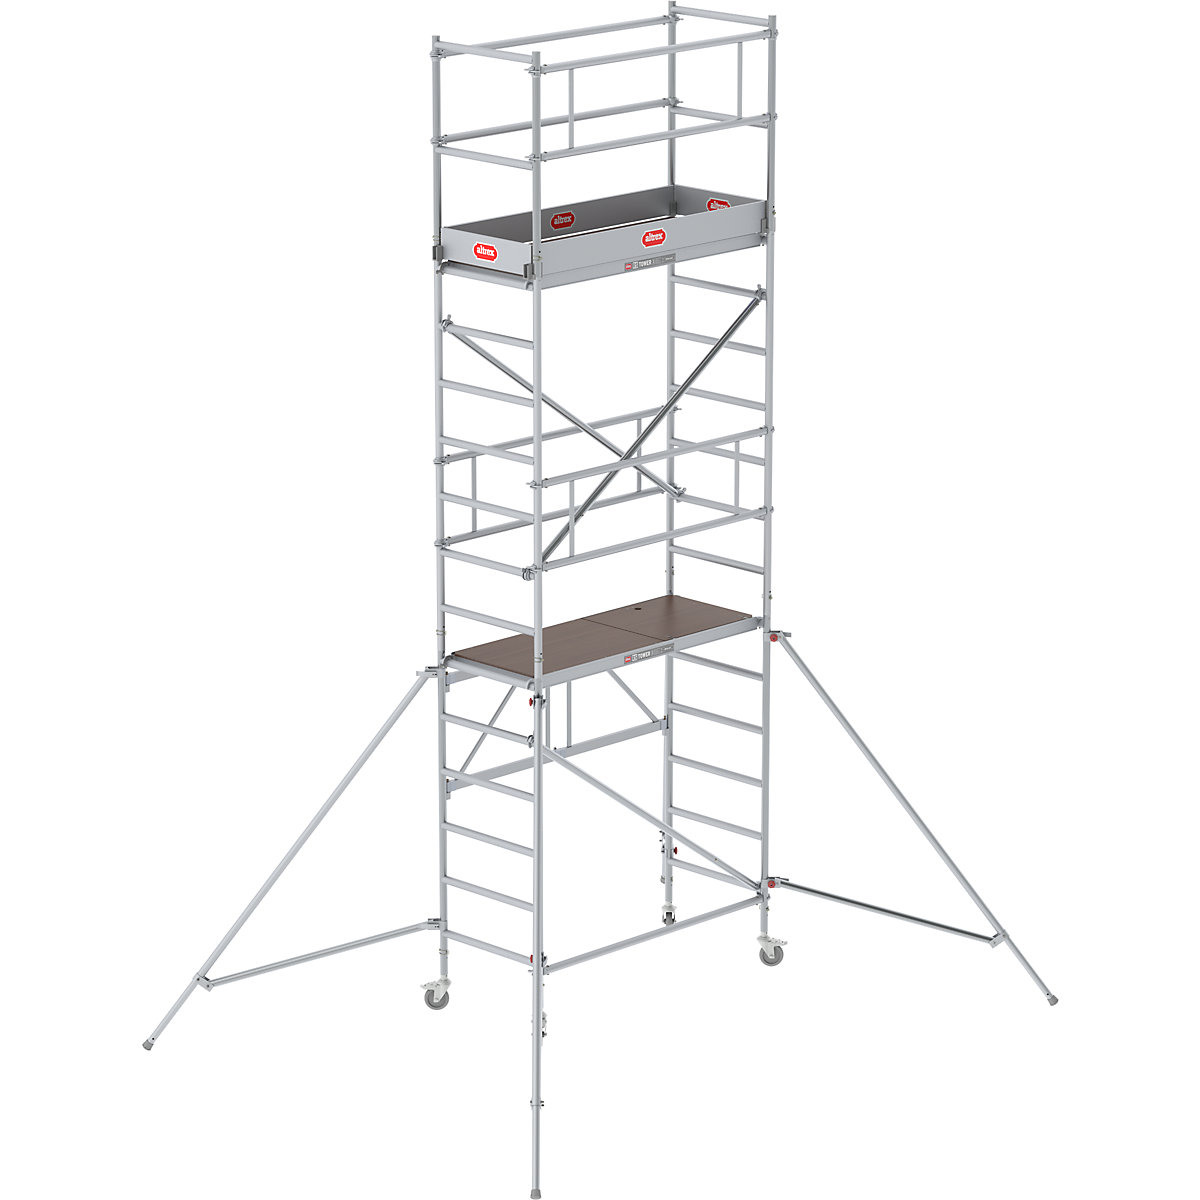 RS TOWER 34 folding tower - Altrex